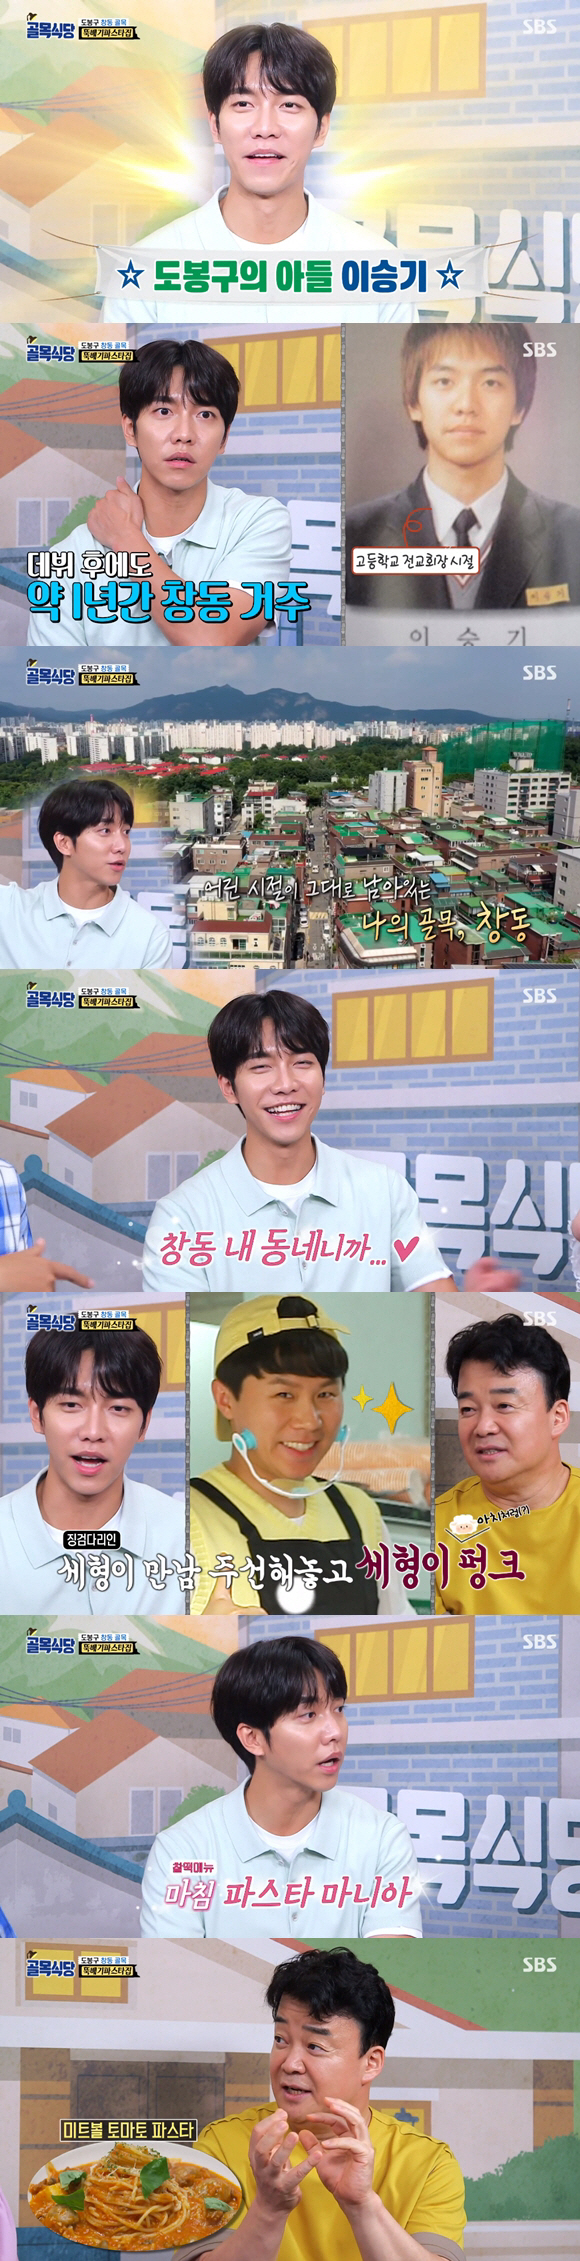 All-time Top-trend Lee Seung-gi is on Alley RestaurantOn the 19th, SBS Baek Jong-wons Alley Restaurant was released on the 25th alley Dobong District Chang-dong Alley.On this day, Lee Seung-gi, a big entertainer, appeared as a pre-tour group and was surprised.Lee Seung-gi, who is known from Dobong District, said: I spent my childhood in Dobong District; after my debut I lived in Chang-dong for about a year.I visited because of shooting today, and I have a lot of old thoughts. Lee Seung-gi also reveals his fanfare for Baek Jong-won, saying, I usually admire Mr. Baek Jong-won.I had a chance to go to Mr. Baek Jong-wons house, he said.Lee Seung-gi said, I admired Mr. Baek Jong-won so much and asked him to ask him to be invited to my house once. But he said, My brother made a punk two days ago.At first I thought it was a teachers situation, and at the end of Lee Seung-gi, Baek Jong-won said, I thought it was Lee Seung-gi. I laughed when I realized that all the reasons were Yang Se-hyeong.On this day, the president of Ttukbaegi Pasta House entered the study of meatball Pasta.I have a taste, but my bosss meatball Pasta lacks personality, said Baek Jong-won. If you make this, do you think customers will come?If you upload a late picture to SNS, you will be able to catch peoples attention. Study the shape of meatballs more. Lee Seung-gi visited the Ttukbaegi Pasta House after receiving a special mission from Baek Jong-won.Baek Jong-won asked Lee Seung-gi for a cool assessment of the new visual meatball Pasta, which the boss reshaped.Lee Seung-gi, who saw the upgraded meatball Pasta, took the picture first; Lee Seung-gi, who ate meatballs with cheddar cheese, said: Its delicious.I think the big meatballs are okay. They look great. Pasta sauce is also praised and said, Its a sauce I want to eat rice. Lee Seung-gi, who was playing Storm Mukbang, said frankly: Its delicious enough to know whats missing - what should I say the problem, its just delicious.Lee Seung-gi, who also sampled Arancini Cream Pasta, praised it as a really favorite CreamPasta flavor, its perfect.He also advised Arancini that I feel like I have less rice than cheese.From the first shooting, the manga duo Chicken Gangjeongjip, which was attracted to the heart of Baek Jong-won as well as the guest.Jung In-sun was put in for a more cool evaluation on the day, and the boss decided to check the homework that he studied for a week.However, the two bosses intimate talks shook their cool hearts and laughed.Earlier, Baek Jong-won advised the sauce, It is the sauce that determines the taste of chicken Gangjeong, so try a lot of tests.The two bosses said, We have used whole garlic directly in the existing frozen garlic, and we have also replaced it with general soy sauce in plum soy sauce.We are also using rice paddies, he explained.However, MC Kim Seong-joo, who ate the changed garlic soy sauce chicken Gangjeong, said, It tastes like pickles.Rather, when you eat only fried, you have a crisper and richer taste. Baek Jong-won also said, I think its too much syrup.If the seasoning chicken is a thick seasoning, the chicken must have a crispy texture, he said.Baek Jong-won pointed out the sticky texture problem without crispy even though the bosss chicken gangjeong was Gangjeong, and put 2MC into the store to find a solution.Kim Seong-joo explained, It came from the Seodang Association. He started the difference between chicken gangjeong and source chicken and helped the bosses study their texture through simple experiments.I made sauce with starch syrup and sugar, and I put fried it and tasted it directly.The starch syrup has a little sweetness, but it has changed the crispness of the fried food to dampness.Last week, with the help of Valeria Fabrizi Riccio chef, the Italian Tuna Pizza, which was praised by all 3MCs, was born.Once again, Valeria Fabrizi Riccio chef visited and created a new menu Cotalia pizza with authentic Italian pizza and Korean pepper oil.Its delicious; its delicious with ricotta cheese, praised Baek Jong-won, who sampled NEW pizza with a buoyant expectation.Kim Seong-joo and Jung In-sun also hailed it as flavory.